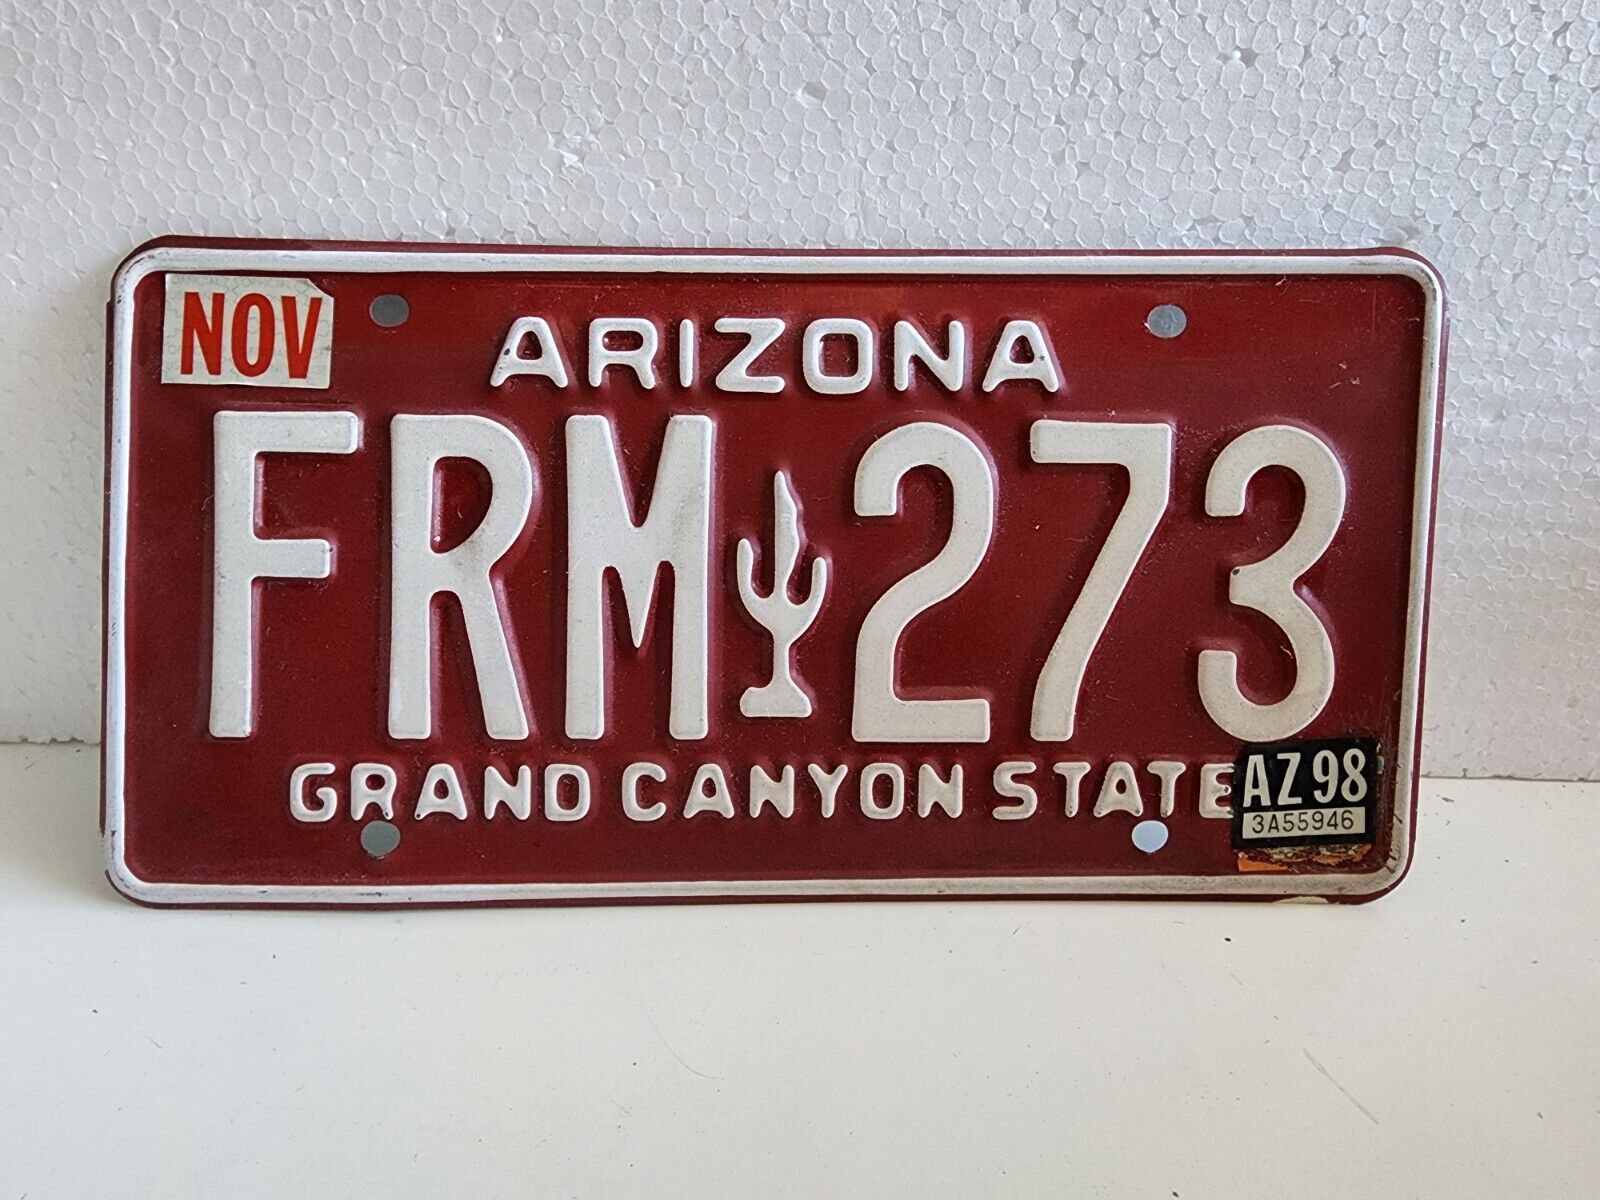 Arizona Grand Canyon State Vintage Red Metal License Plate 80-97 FRM 273 Cactus